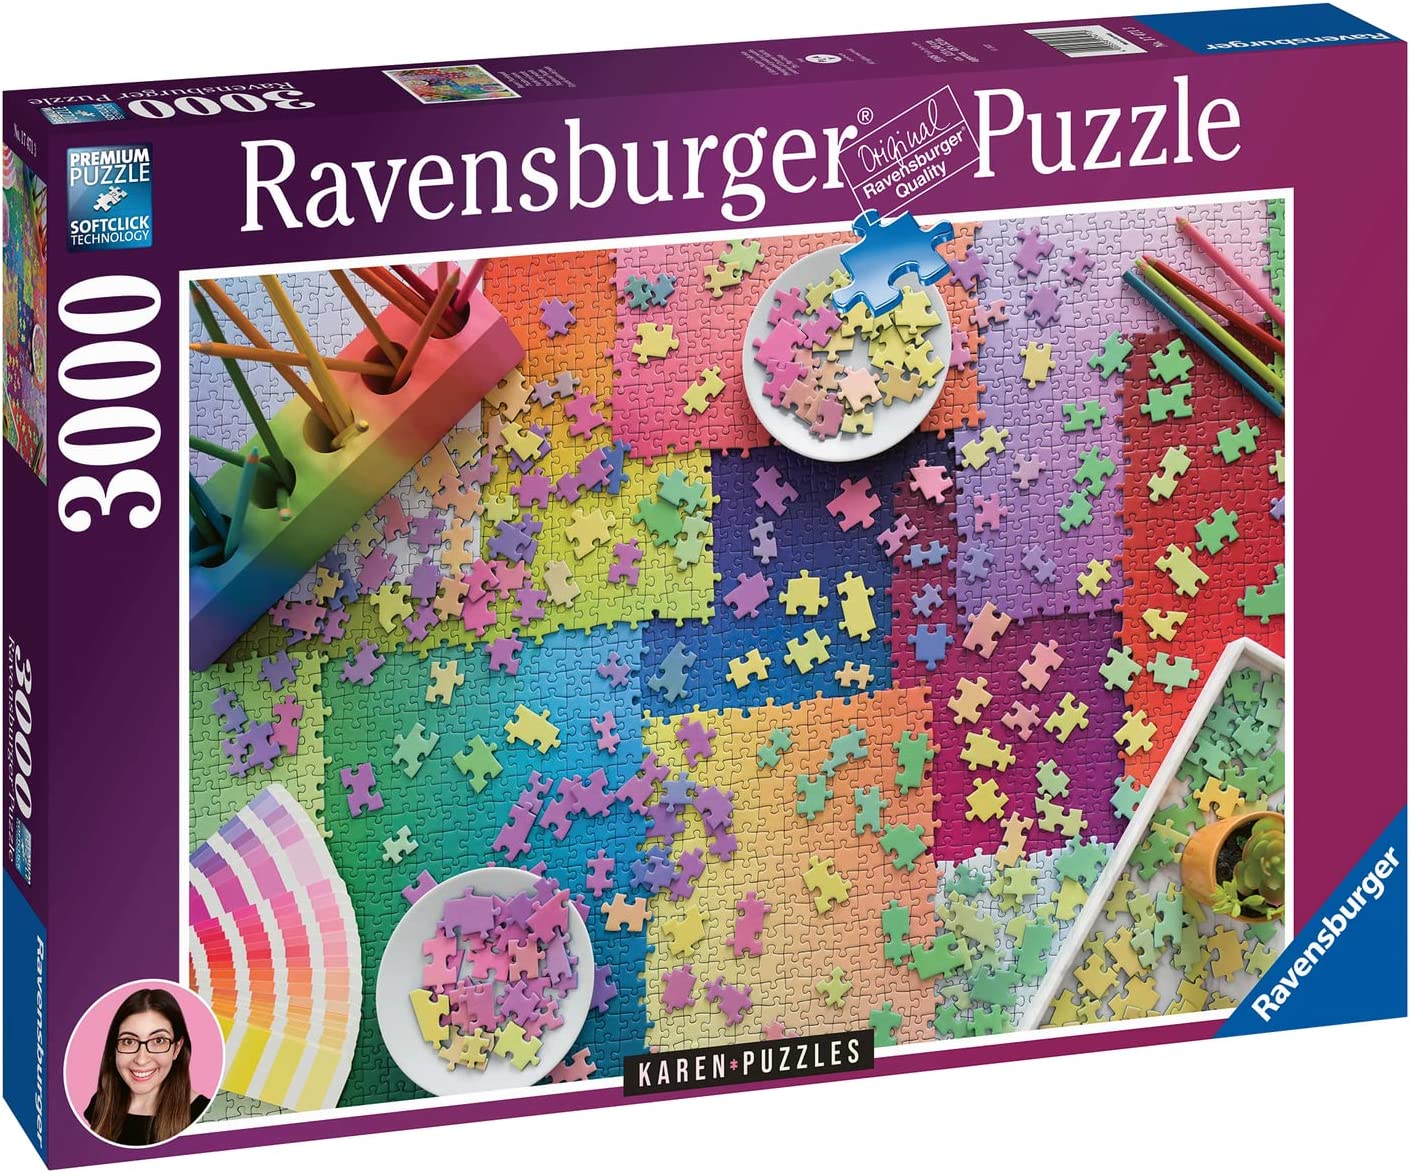 Puzzles on Puzzles 3000 Piece Jigsaw Puzzle for Adults - 17471 - Handcrafted Tooling, Every Piece Fits Together Perfectly